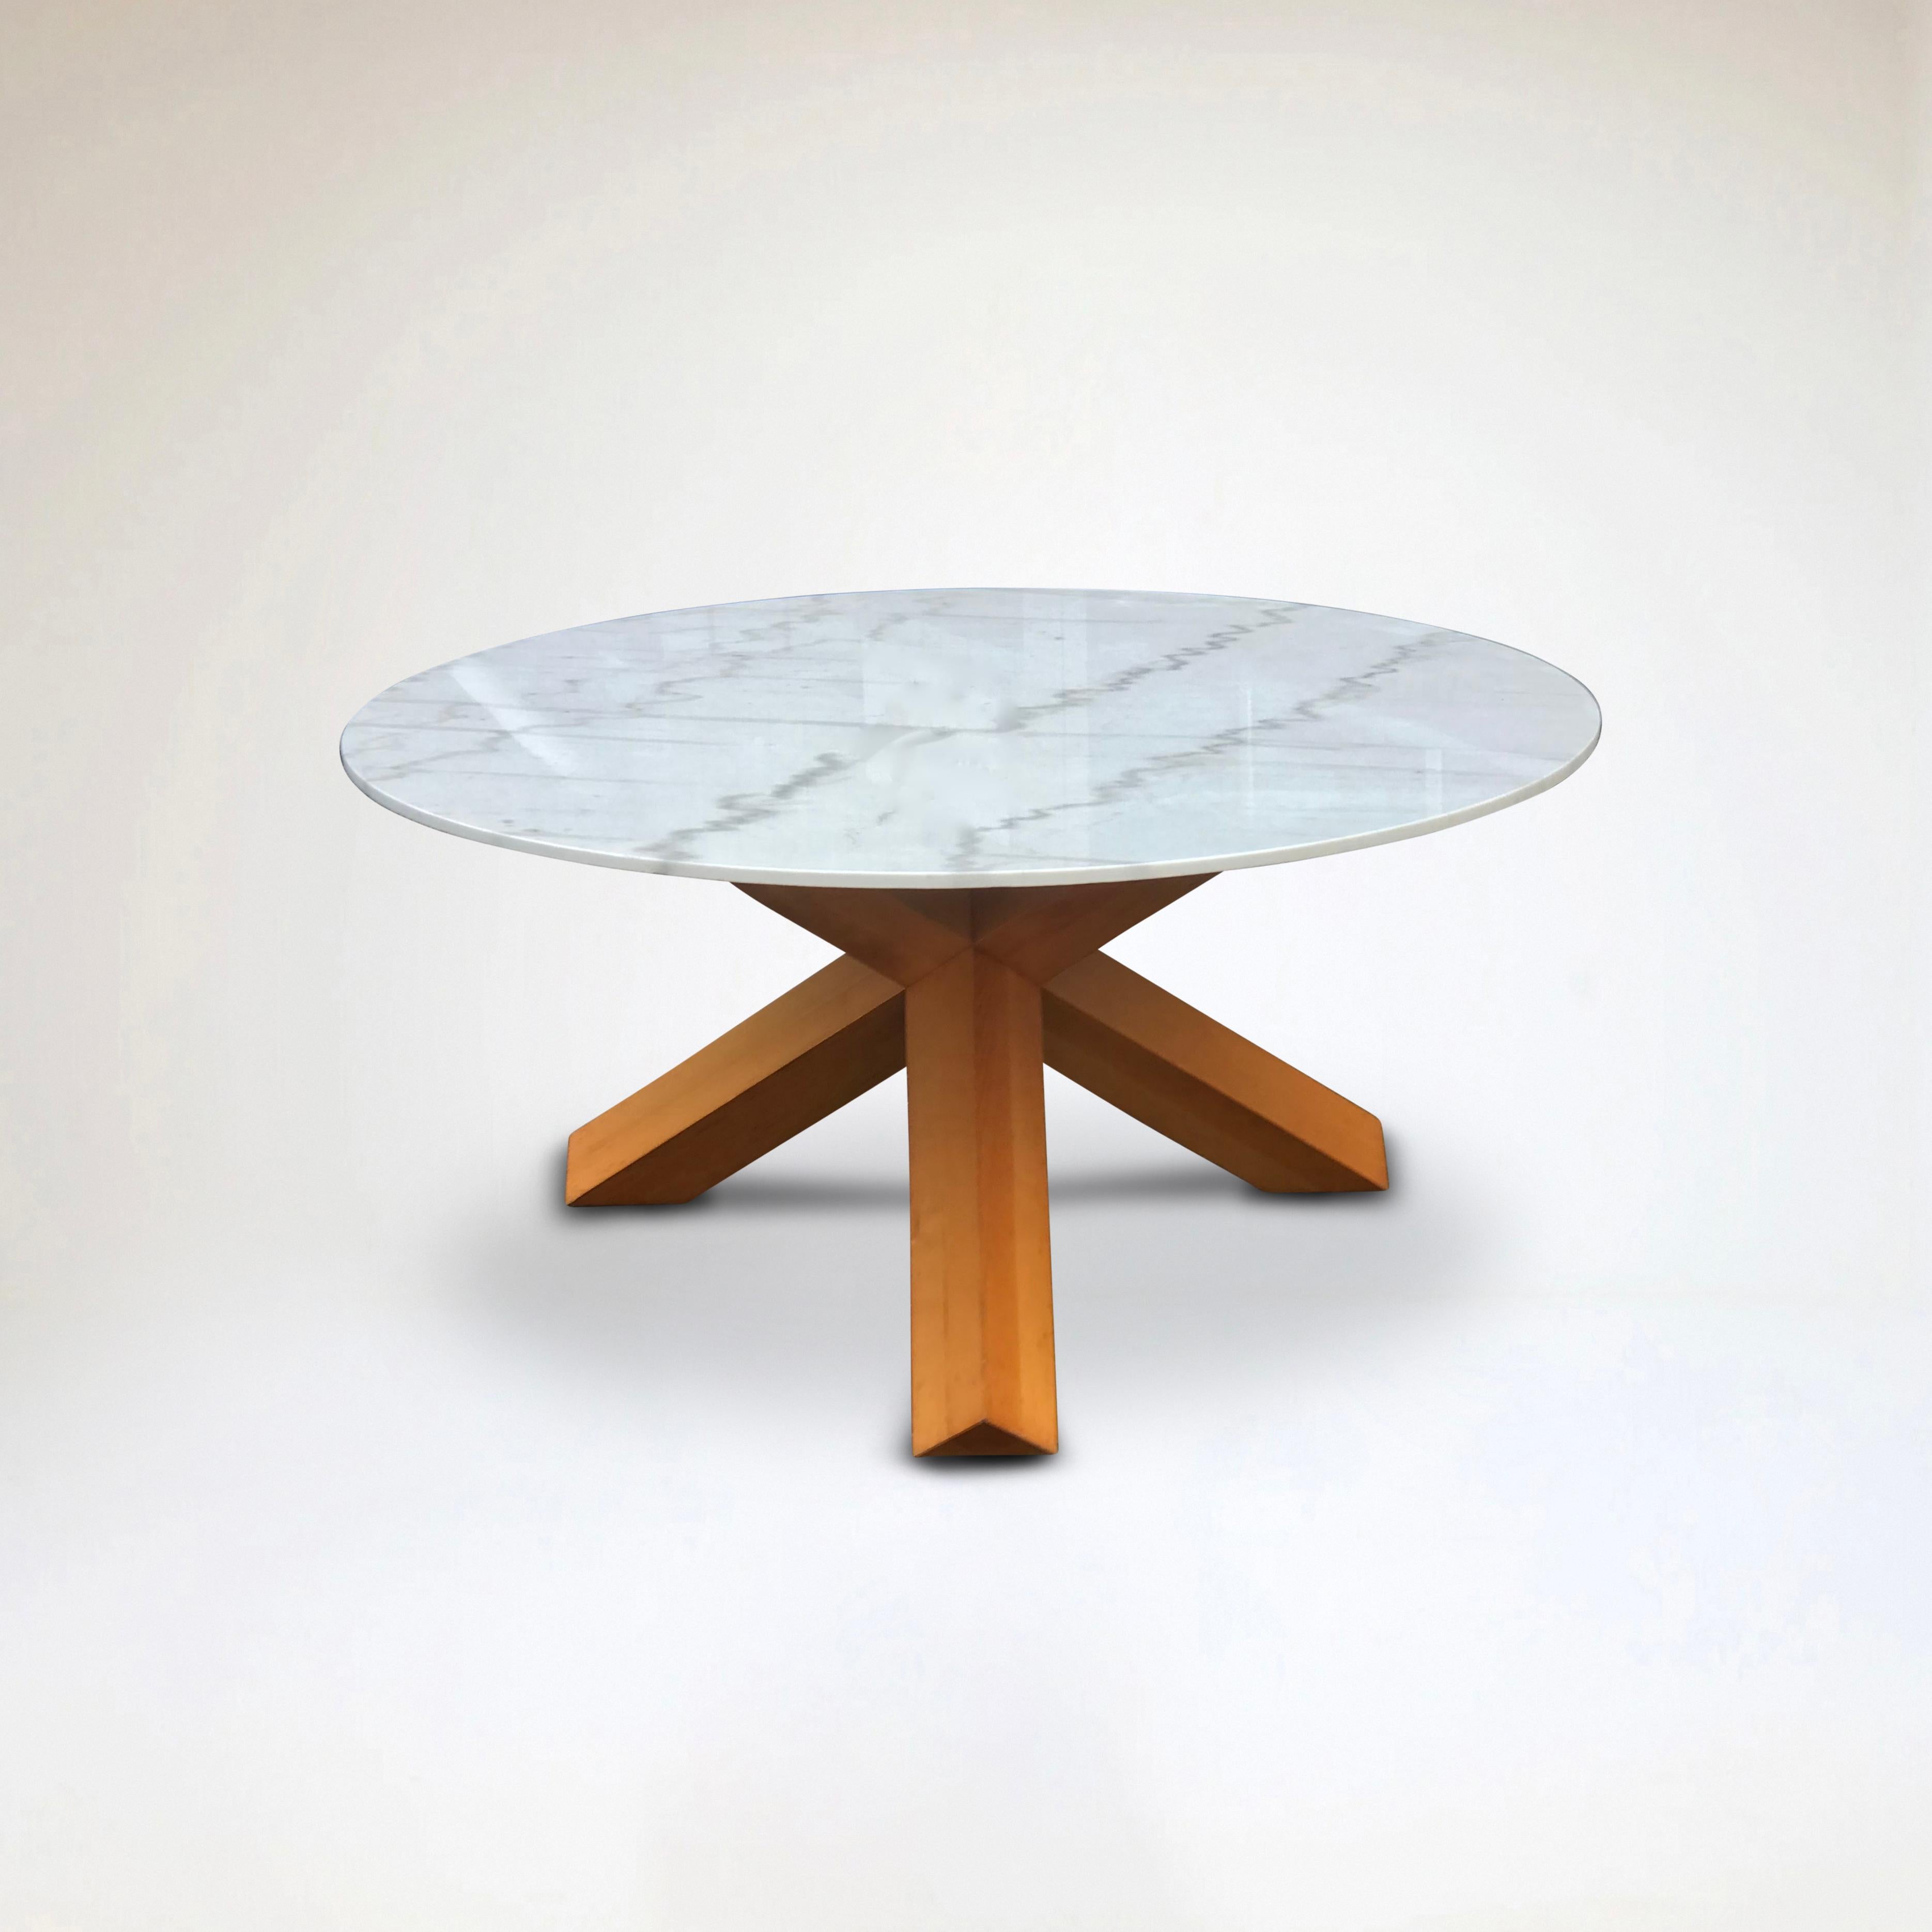 Space Age La Rotonda Ash and marble dining table by Mario Bellini for Cassina 1980s For Sale